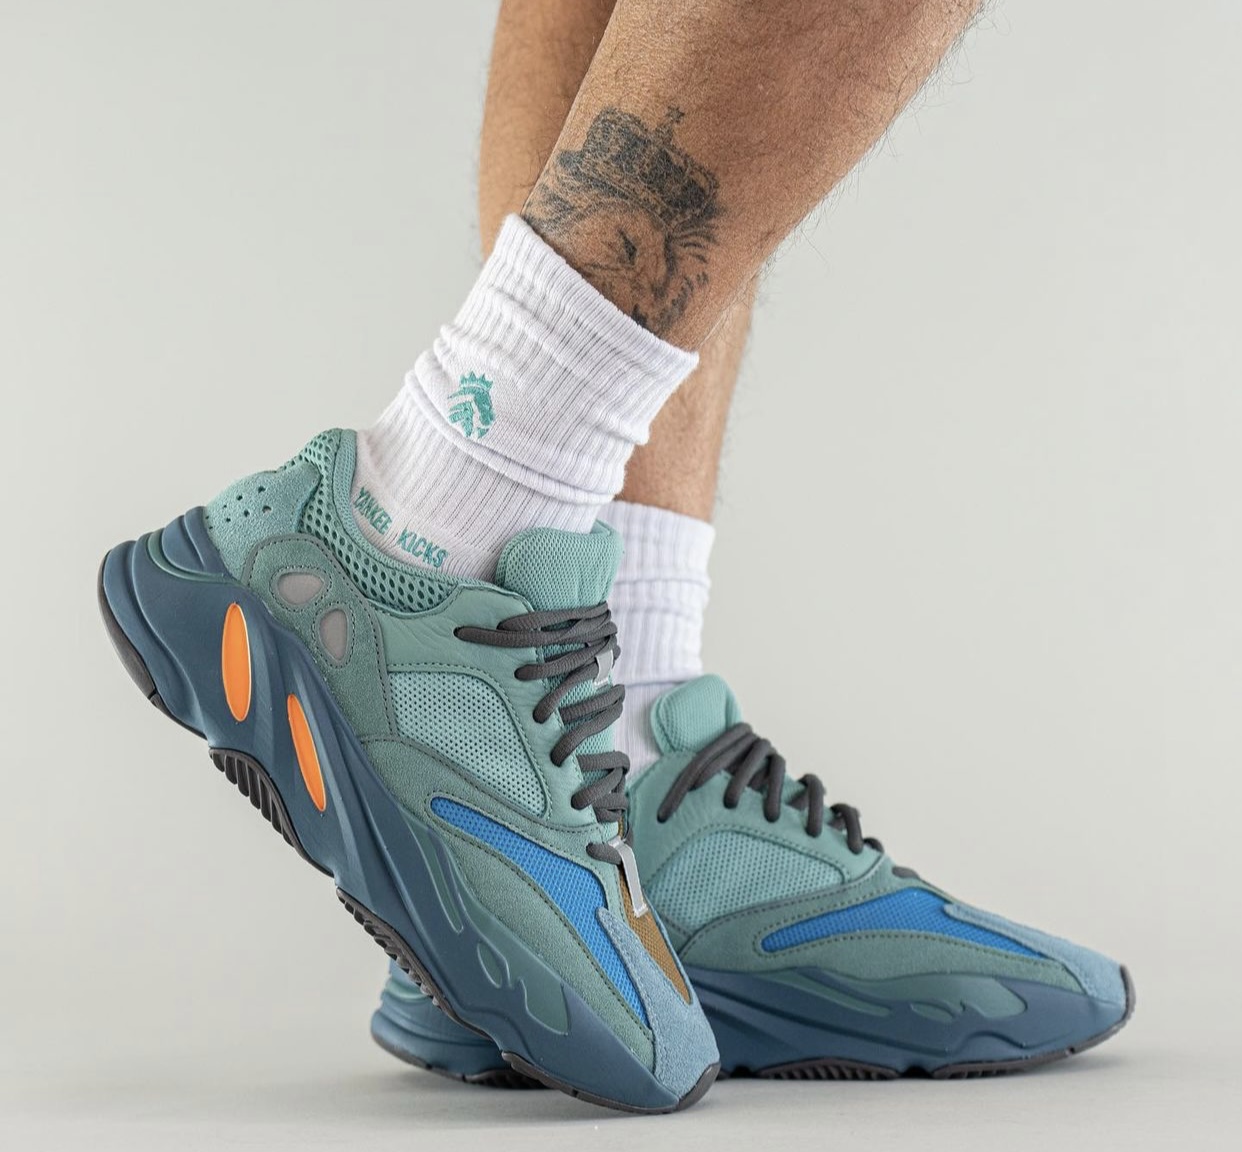 adidas Yeezy Boost 700 Faded Azure GZ2002 Release event On Feet 4